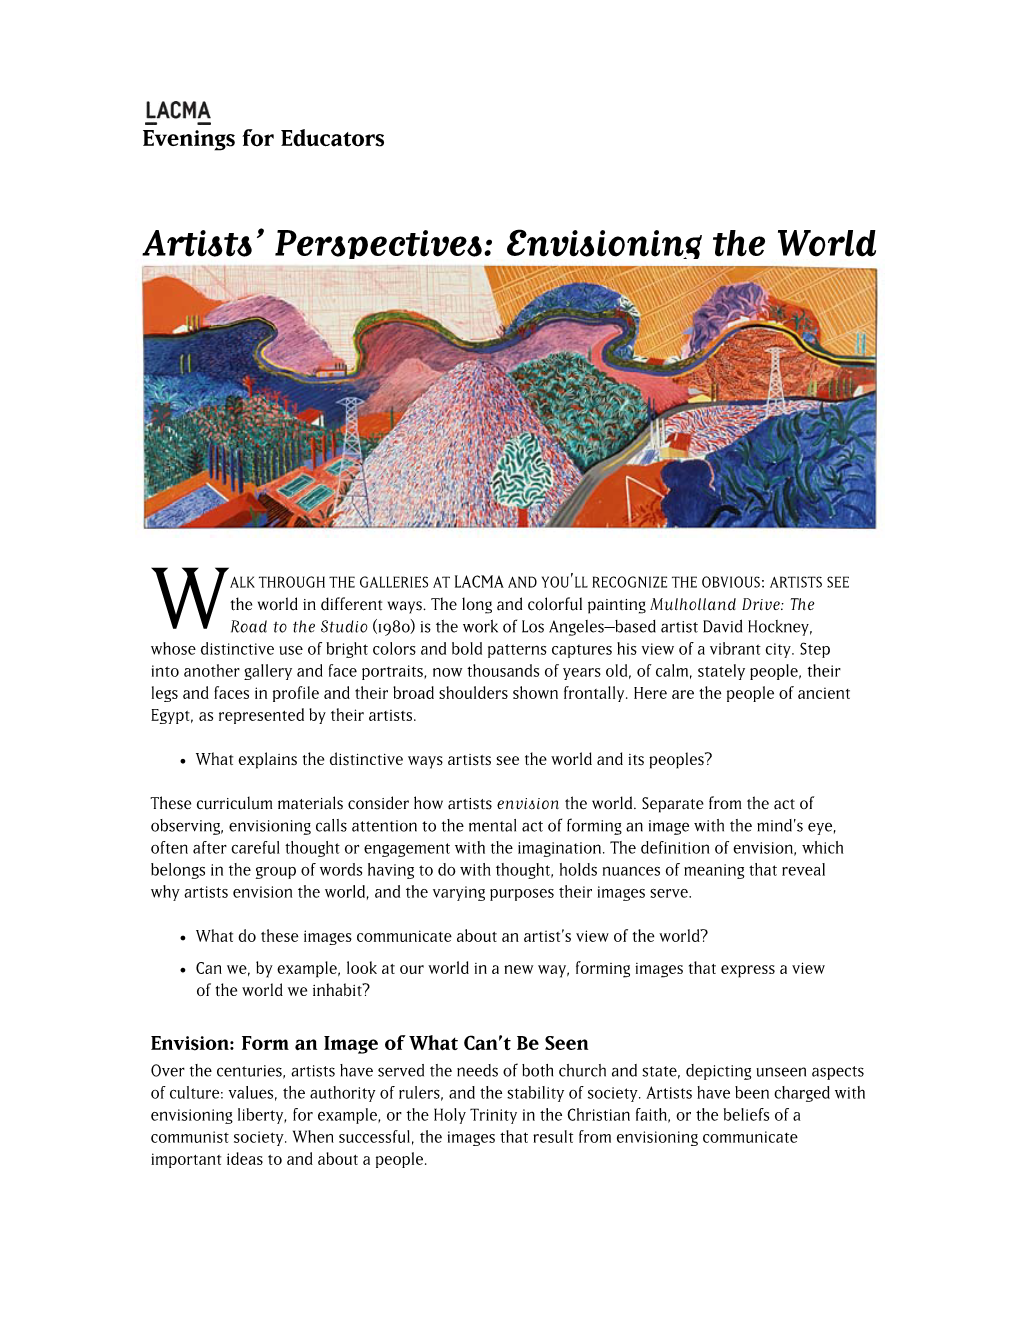 Artists' Perspectives: Envisioning the World